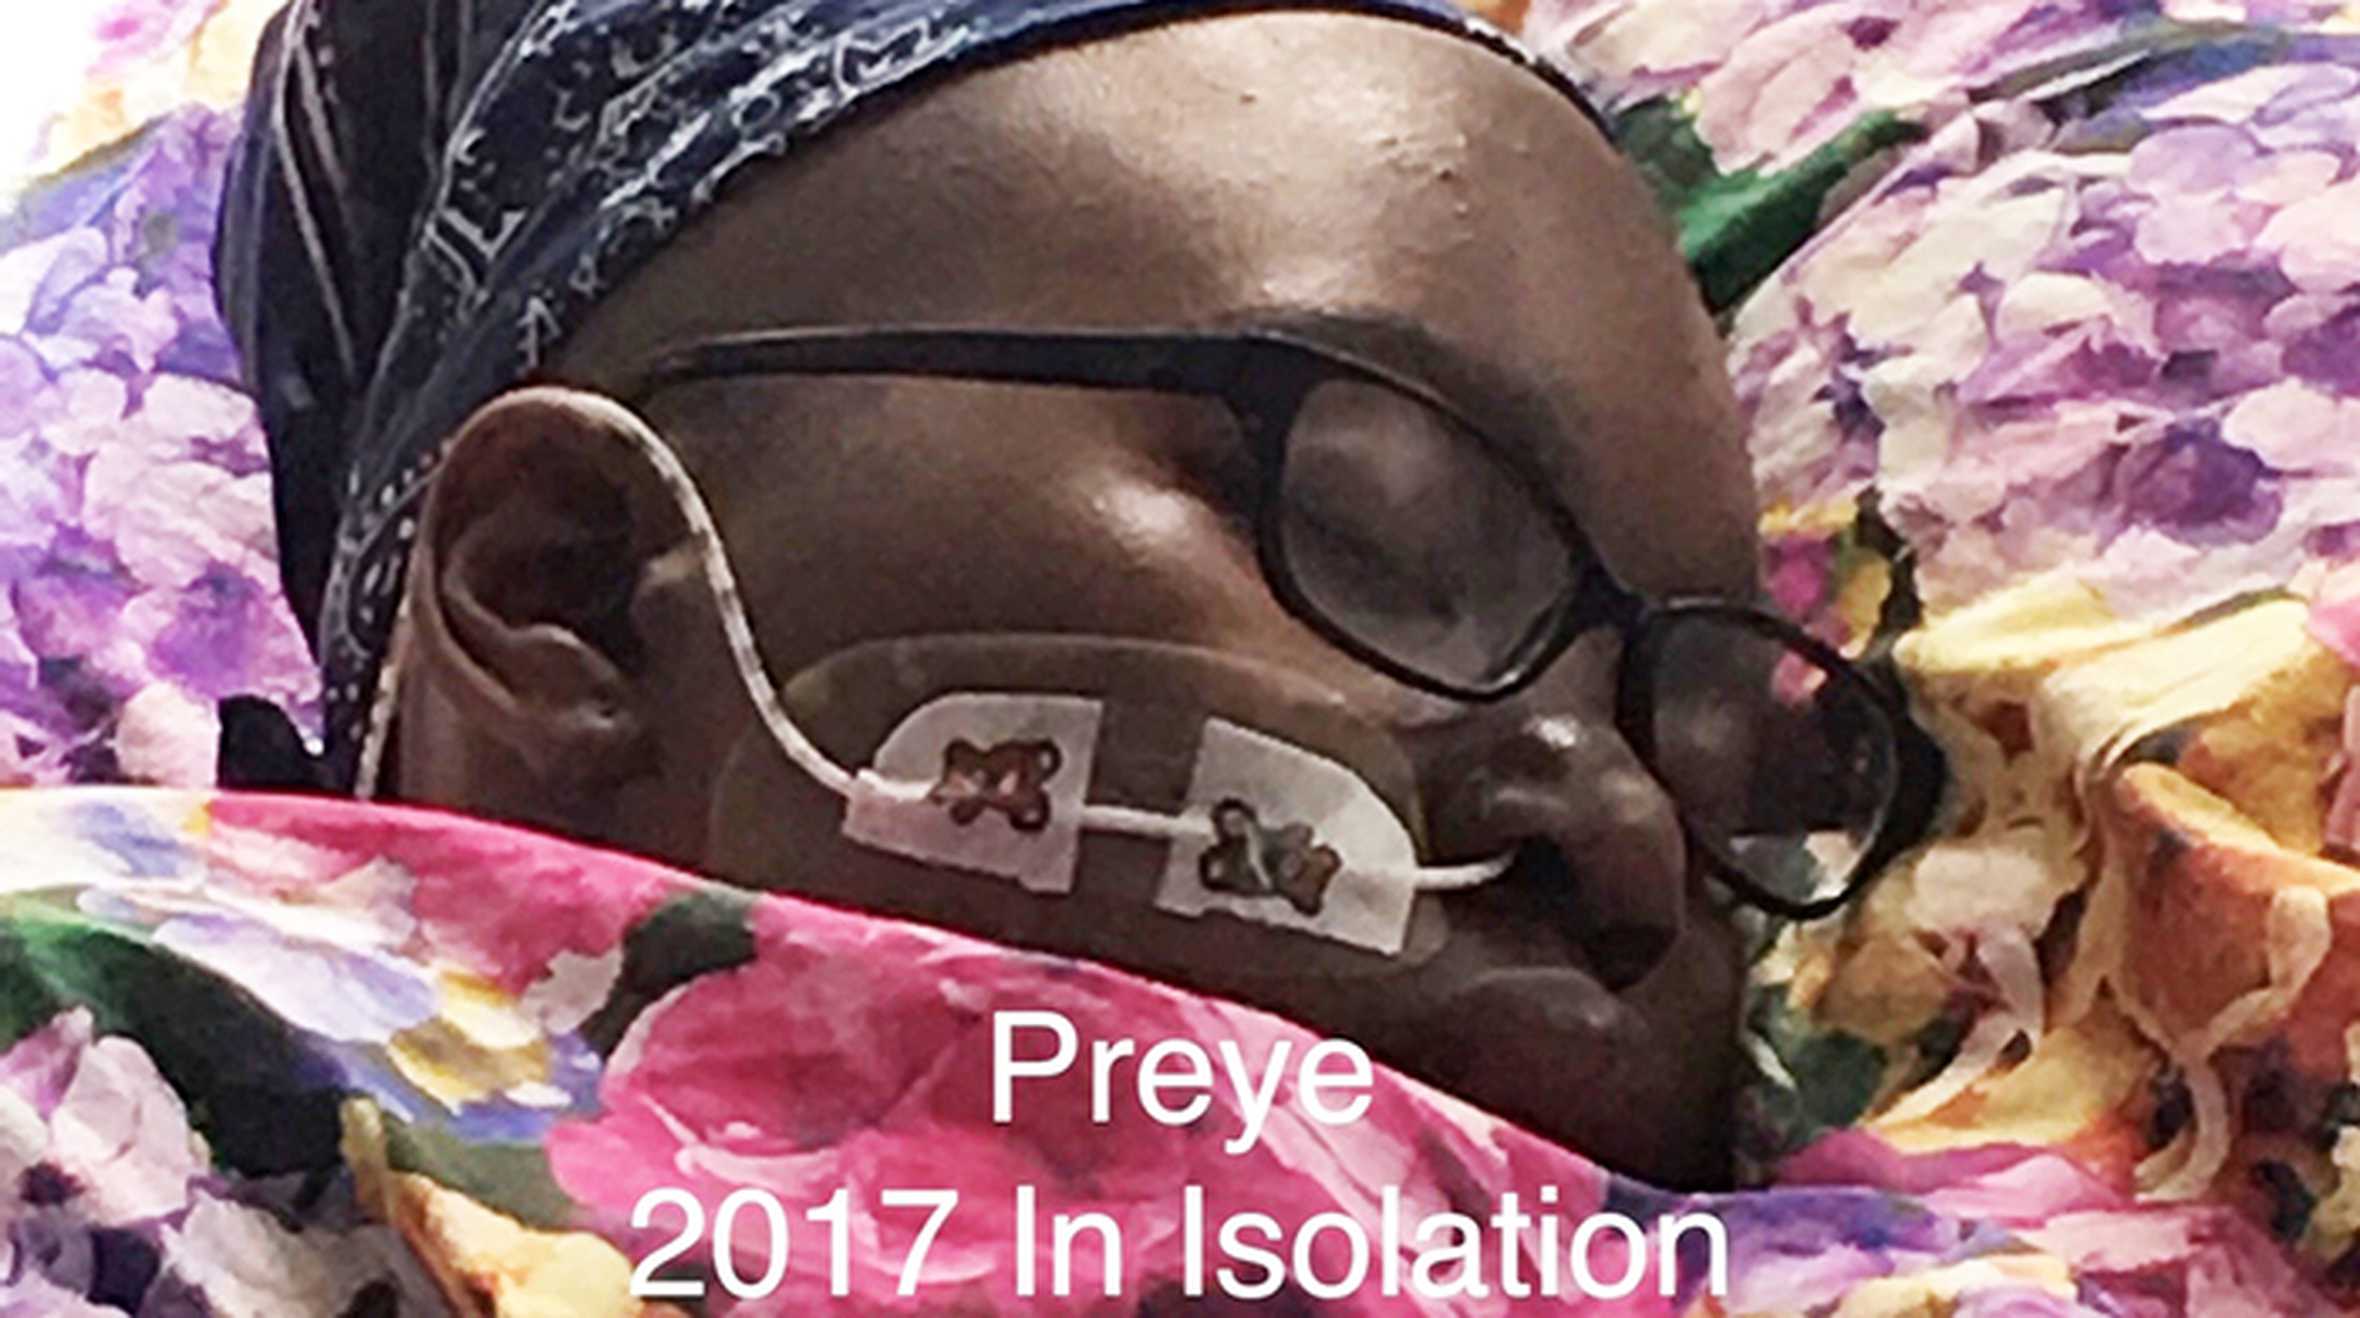 Preye in isolation during treatment in 2017